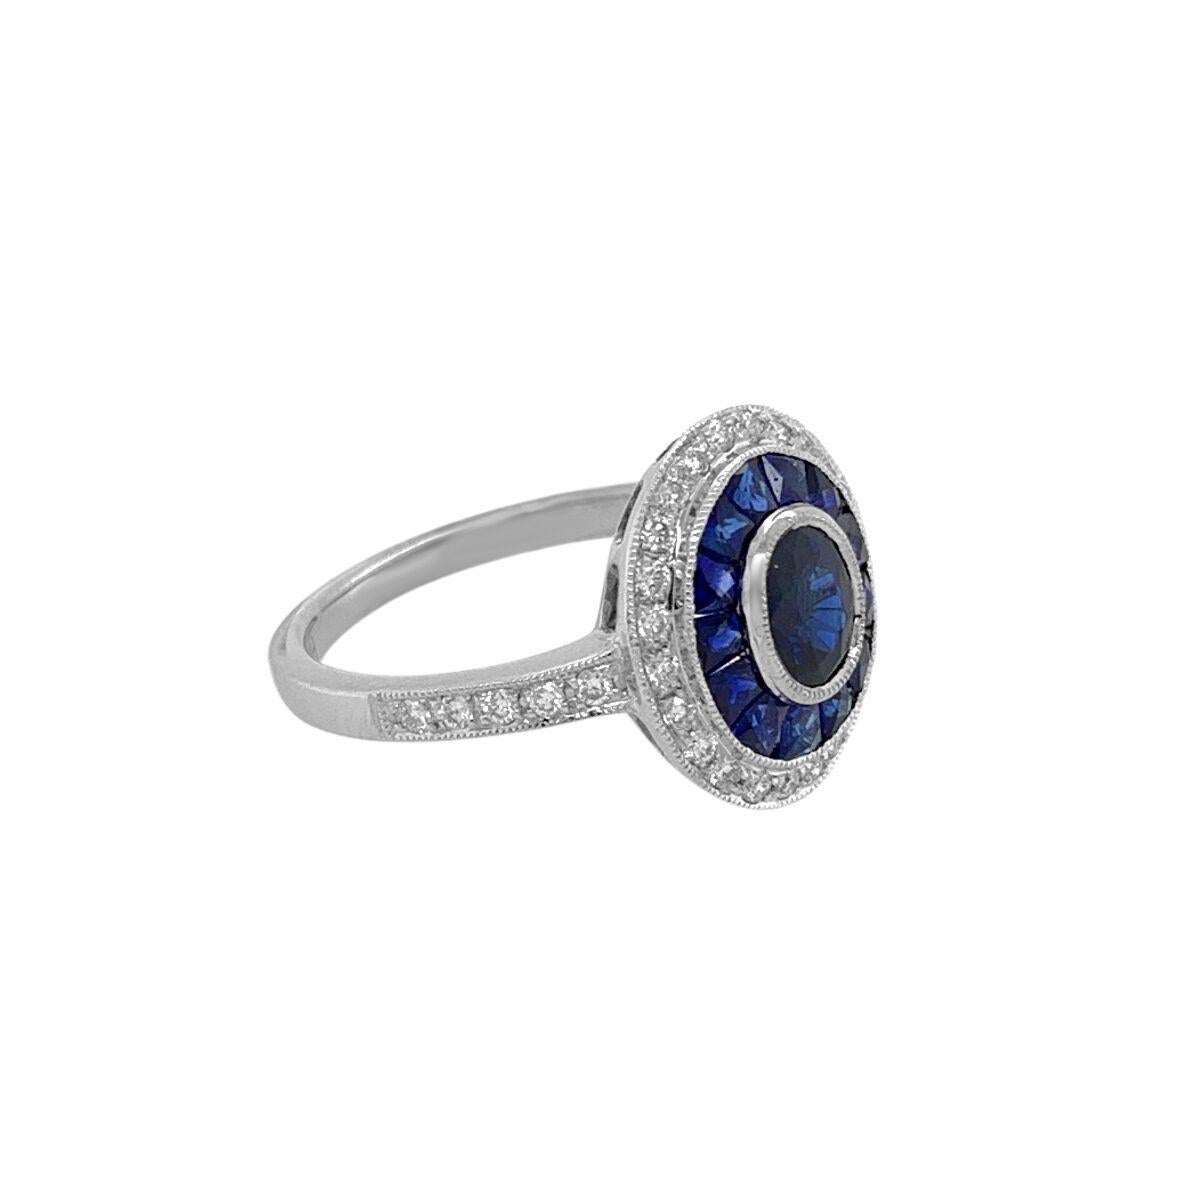 Art Deco at its best, using French calibre cut Precious Gemstones.

New World Technology meets Old World Styles!

Material: 14K White Gold
Hallmark: 14K JH
Metal Finish: High Polish
Ring Size: 6.5
Gemstone: Sapphire, Diamond
Sapphire Weight: 1.61